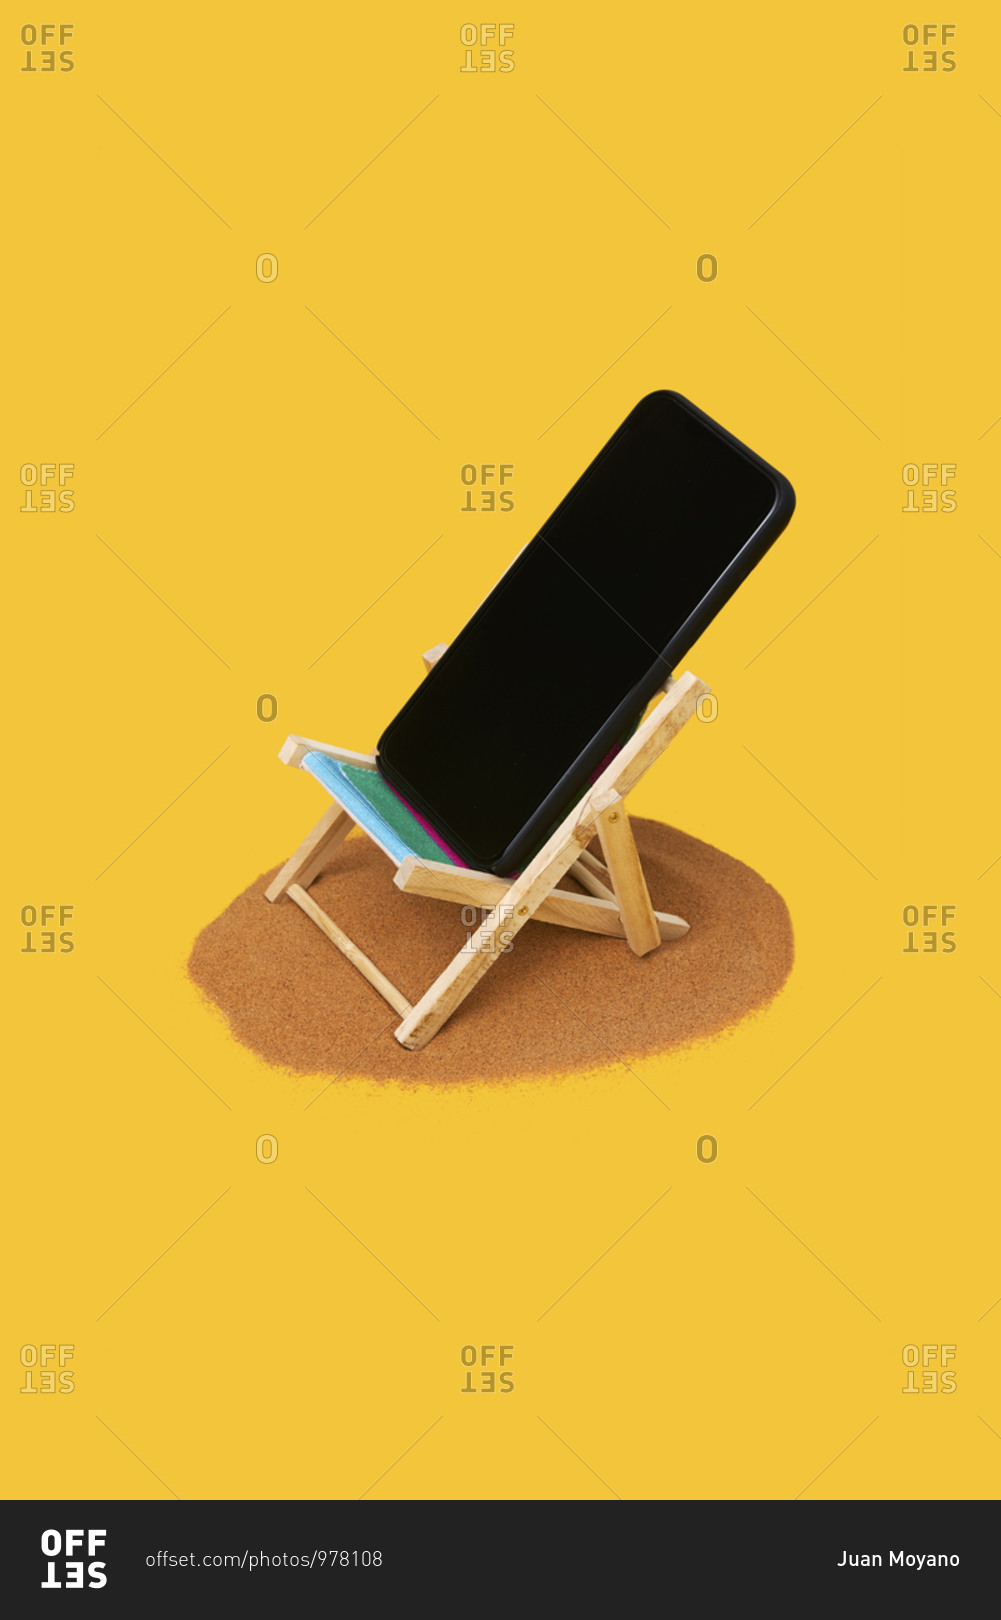 Smartphone in a small deck chair on a pile of sand on a bright yellow background